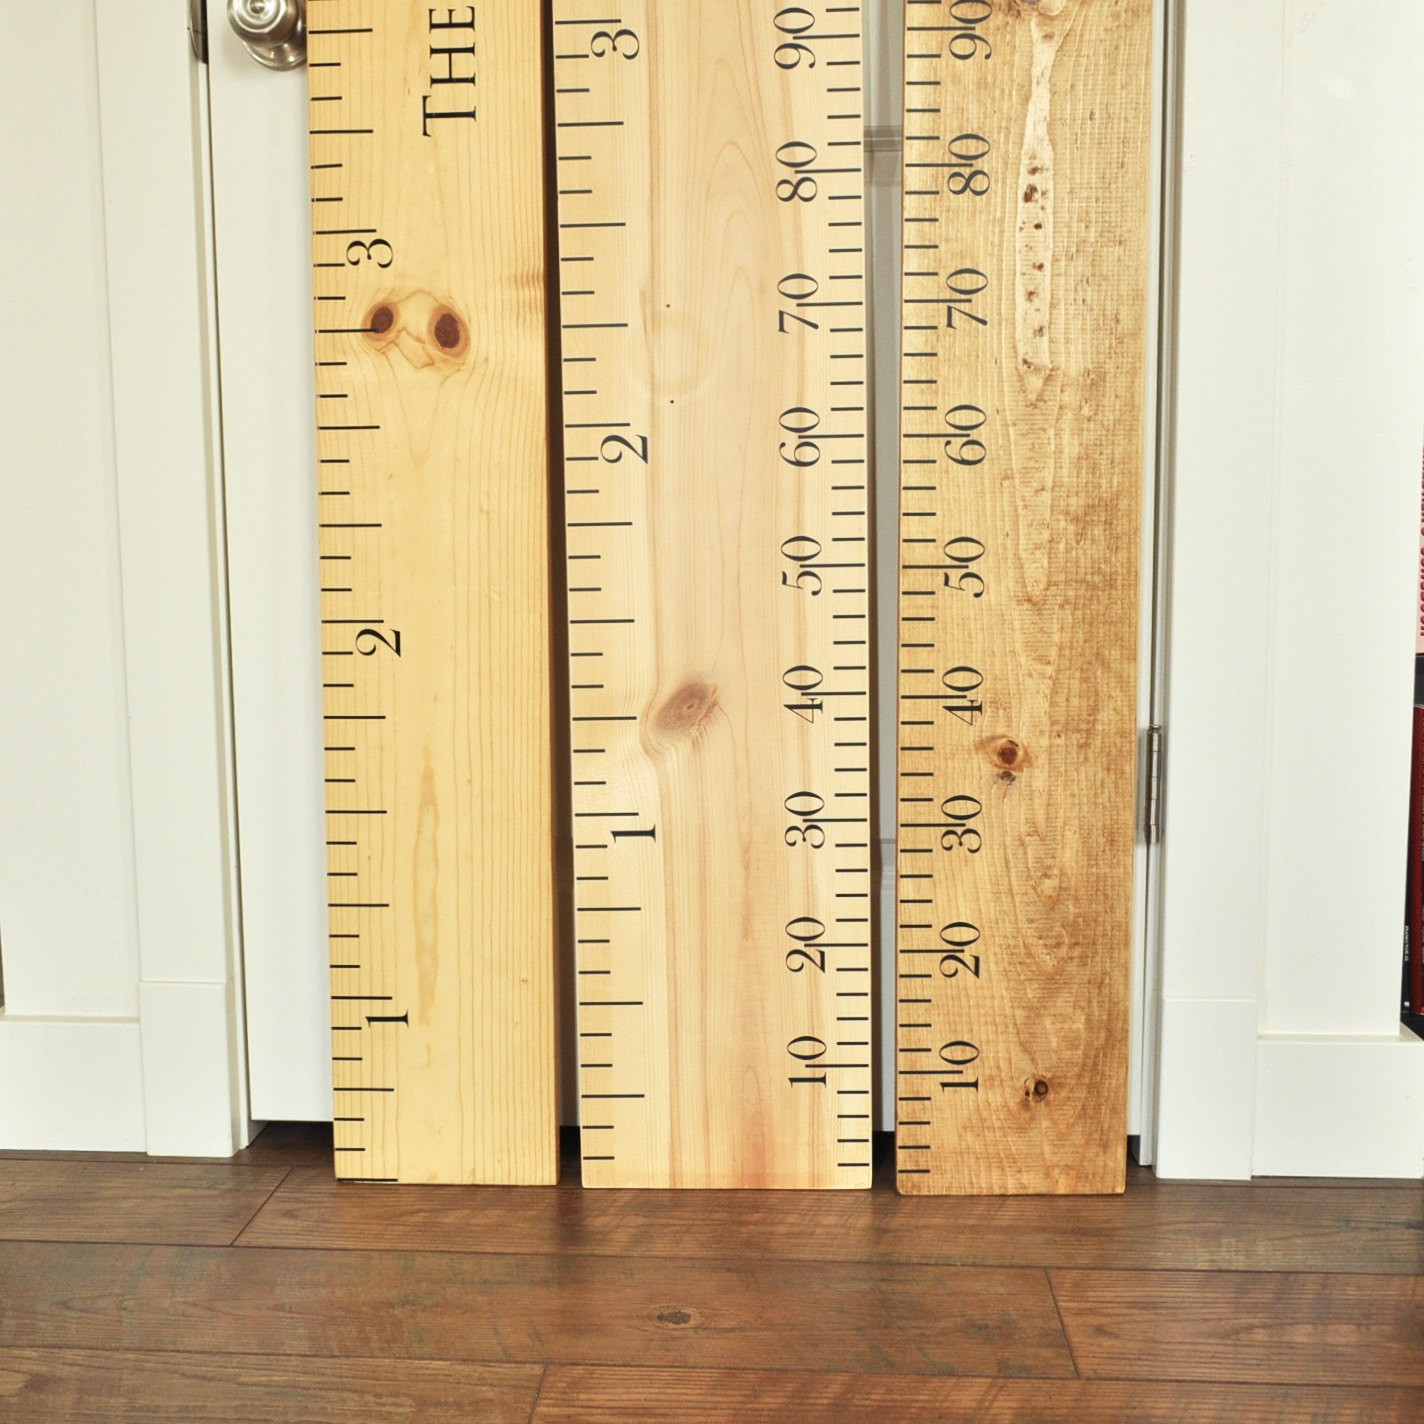 DIY Growth Chart Wood
 Ruler Growth Chart Kit DIY Project Oversized Wood Ruler